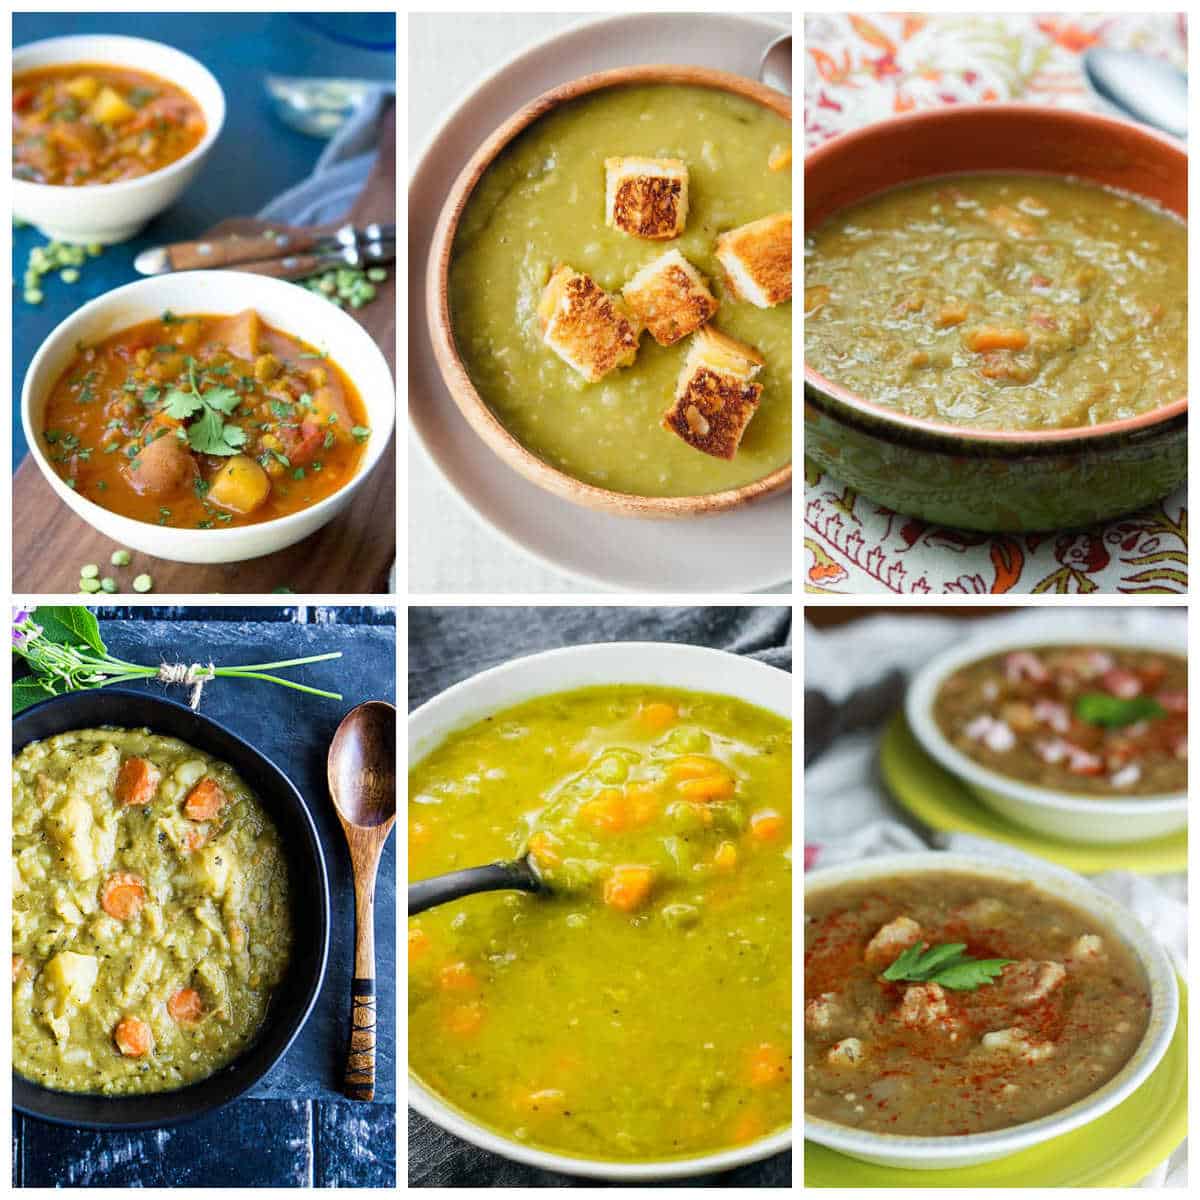 Vegetarian Split Pea Soup Recipes (Slow Cooker or Instant Pot) collage showing featured recipes.